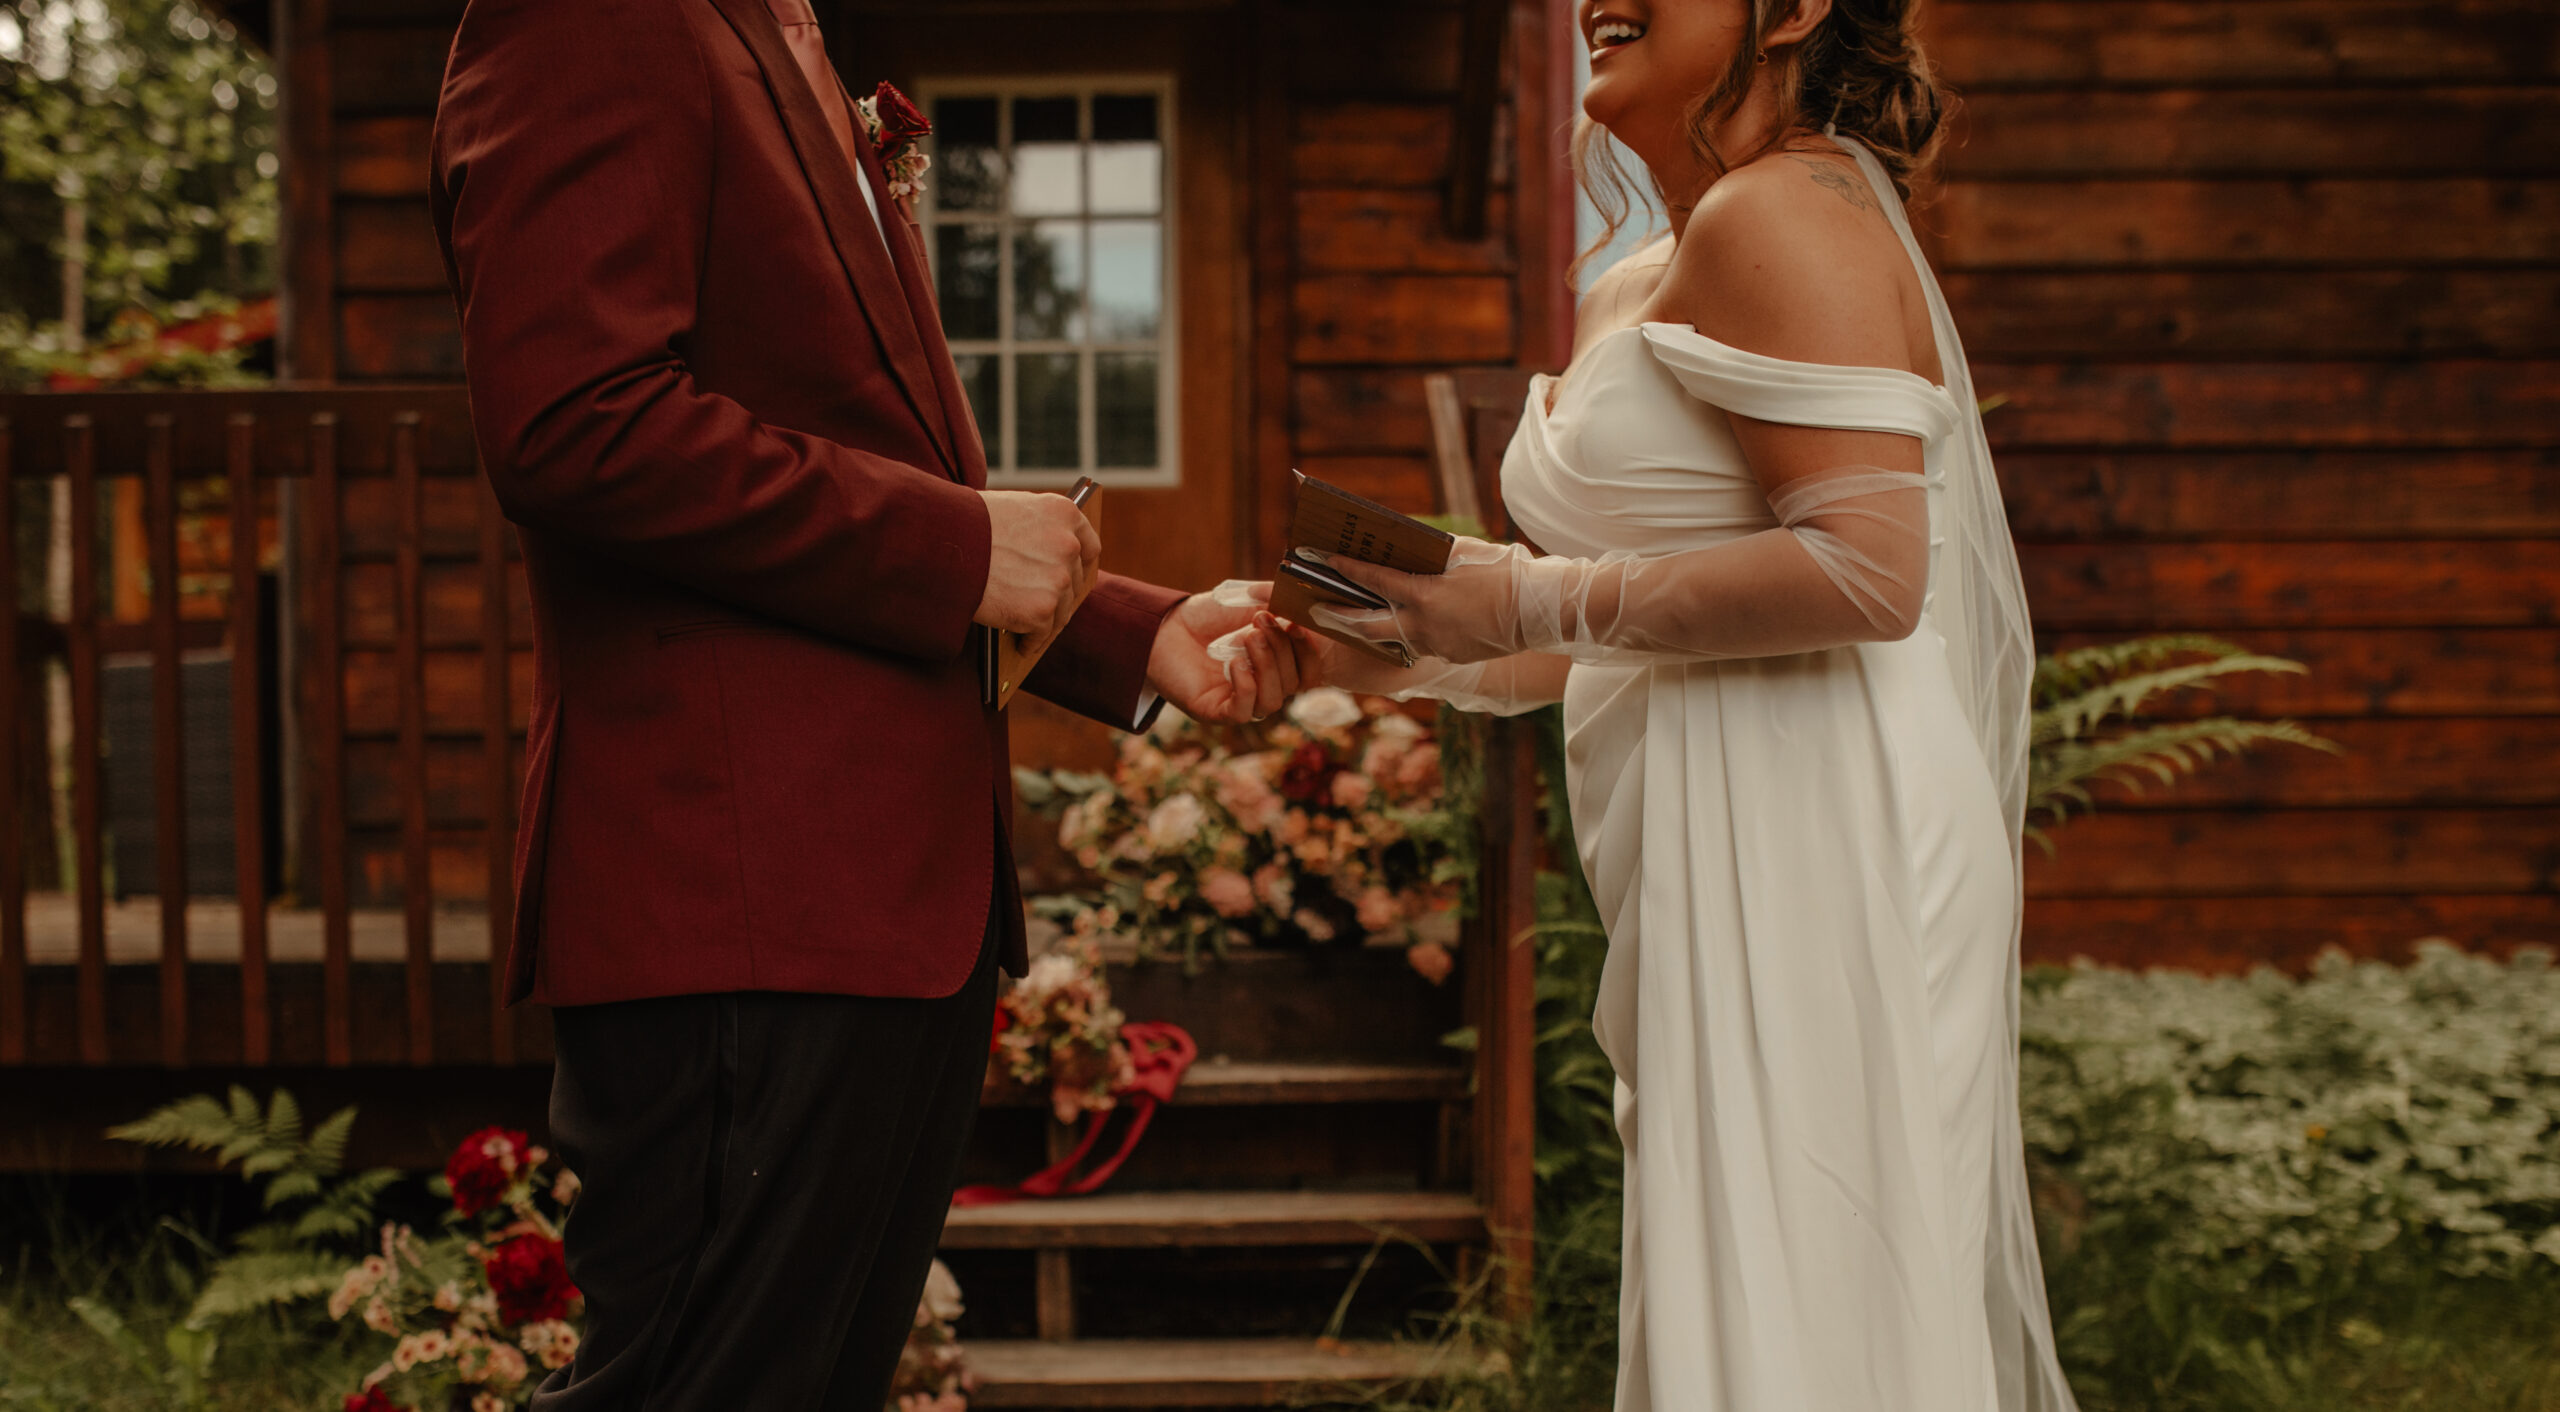 Intimate Elopement between Man and Woman at Alaskan Cabin with burgundy and Mauve colors